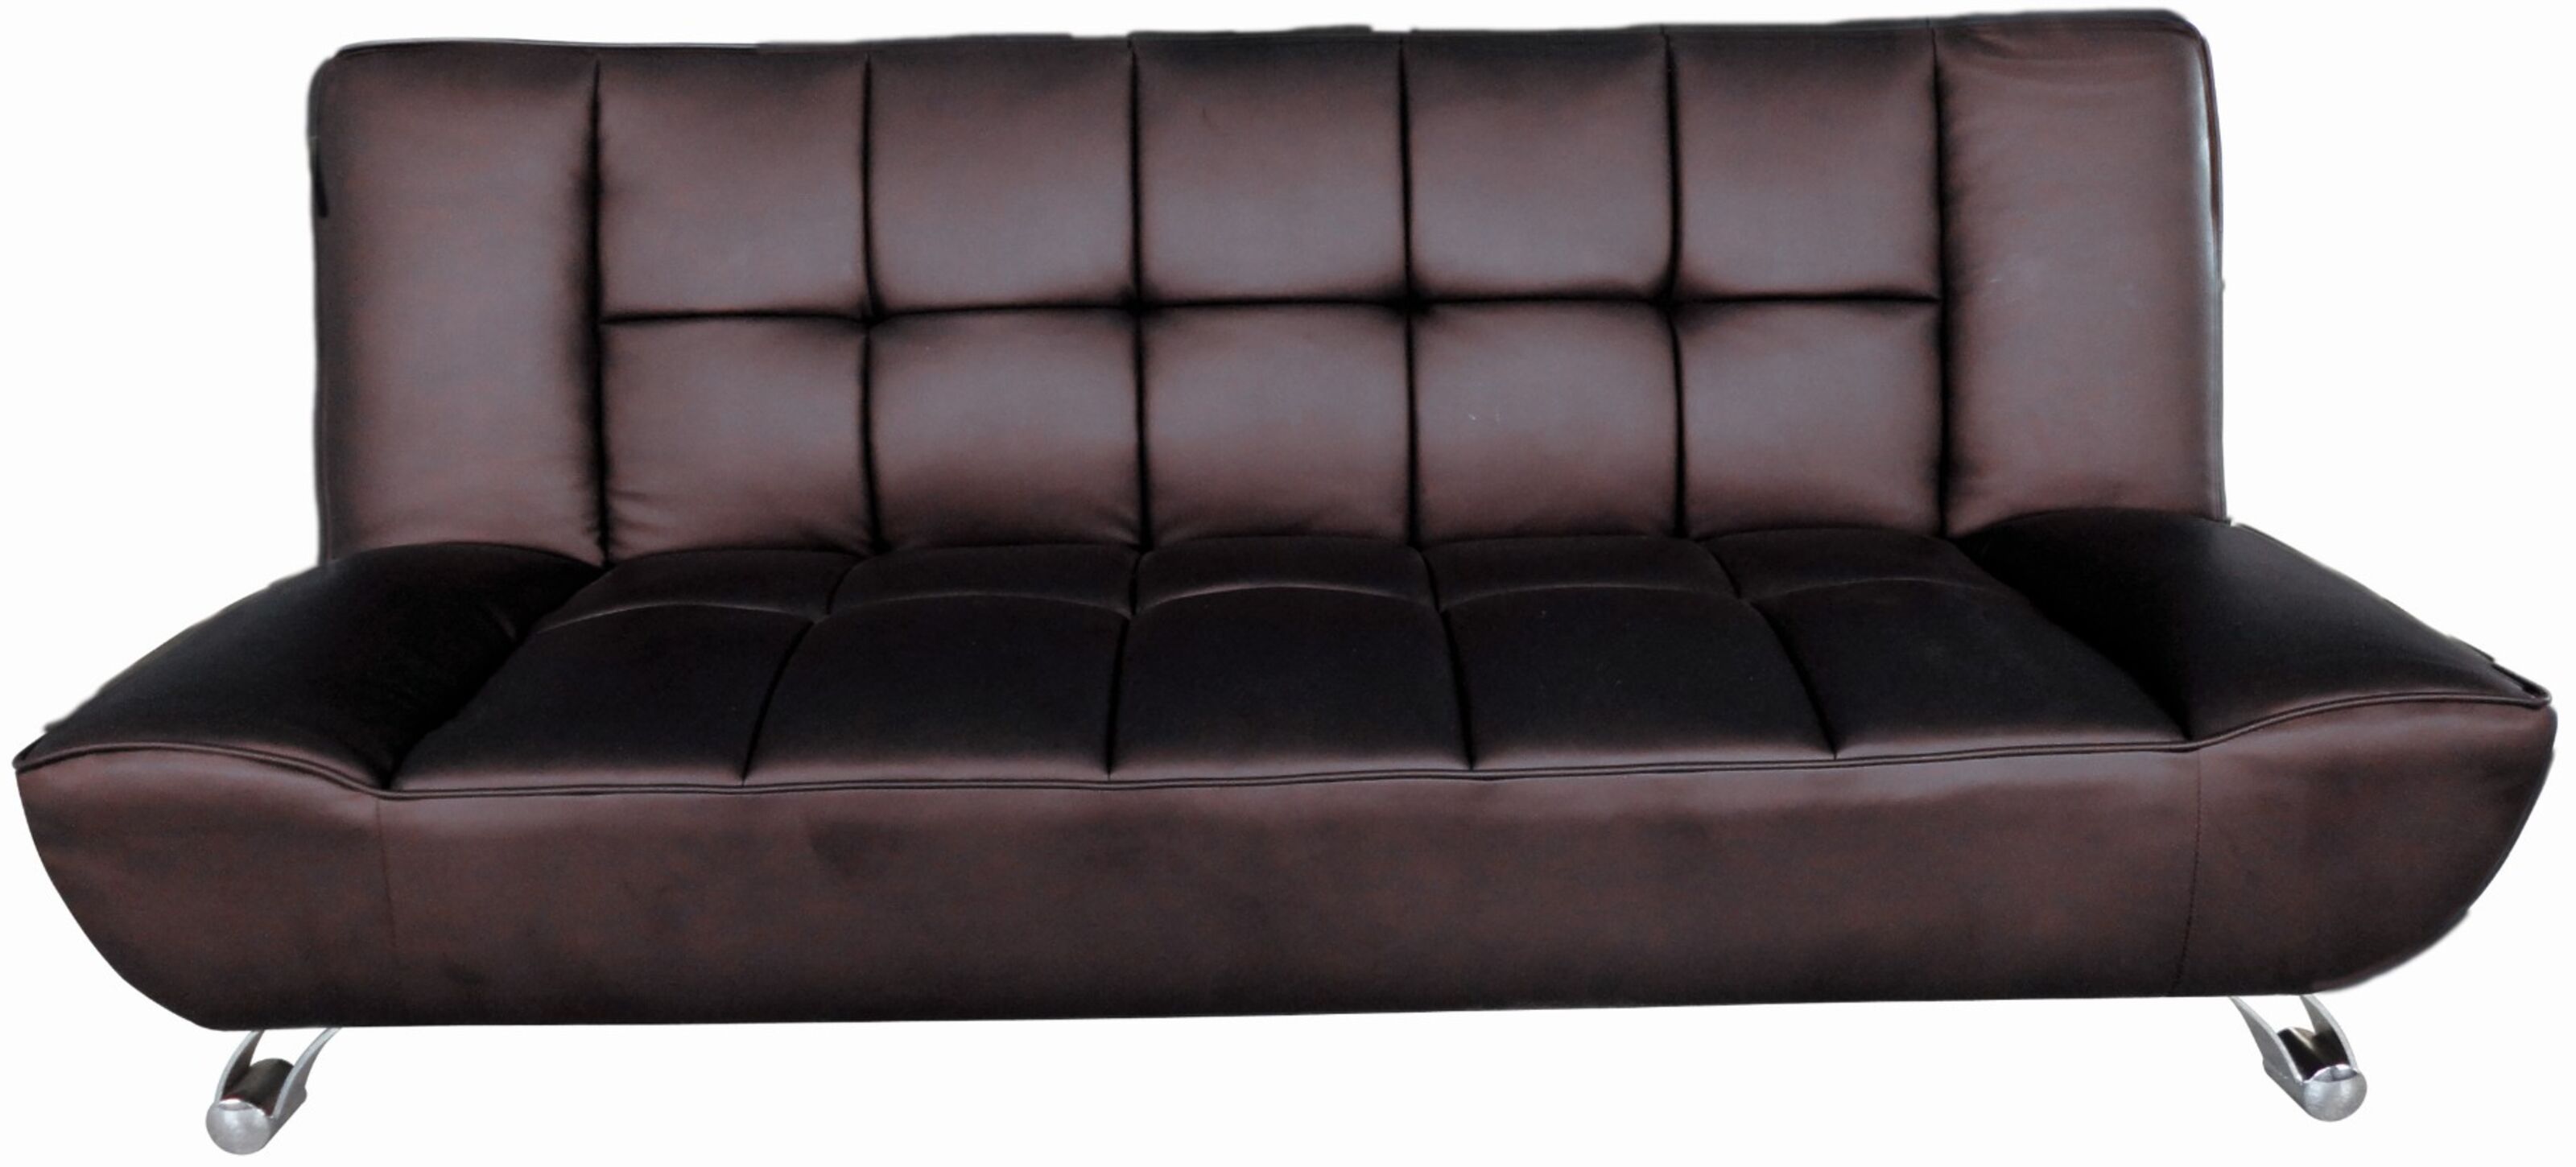 Agata Brown Faux Leather Sofa Bed With, Leather Chair Sleeper